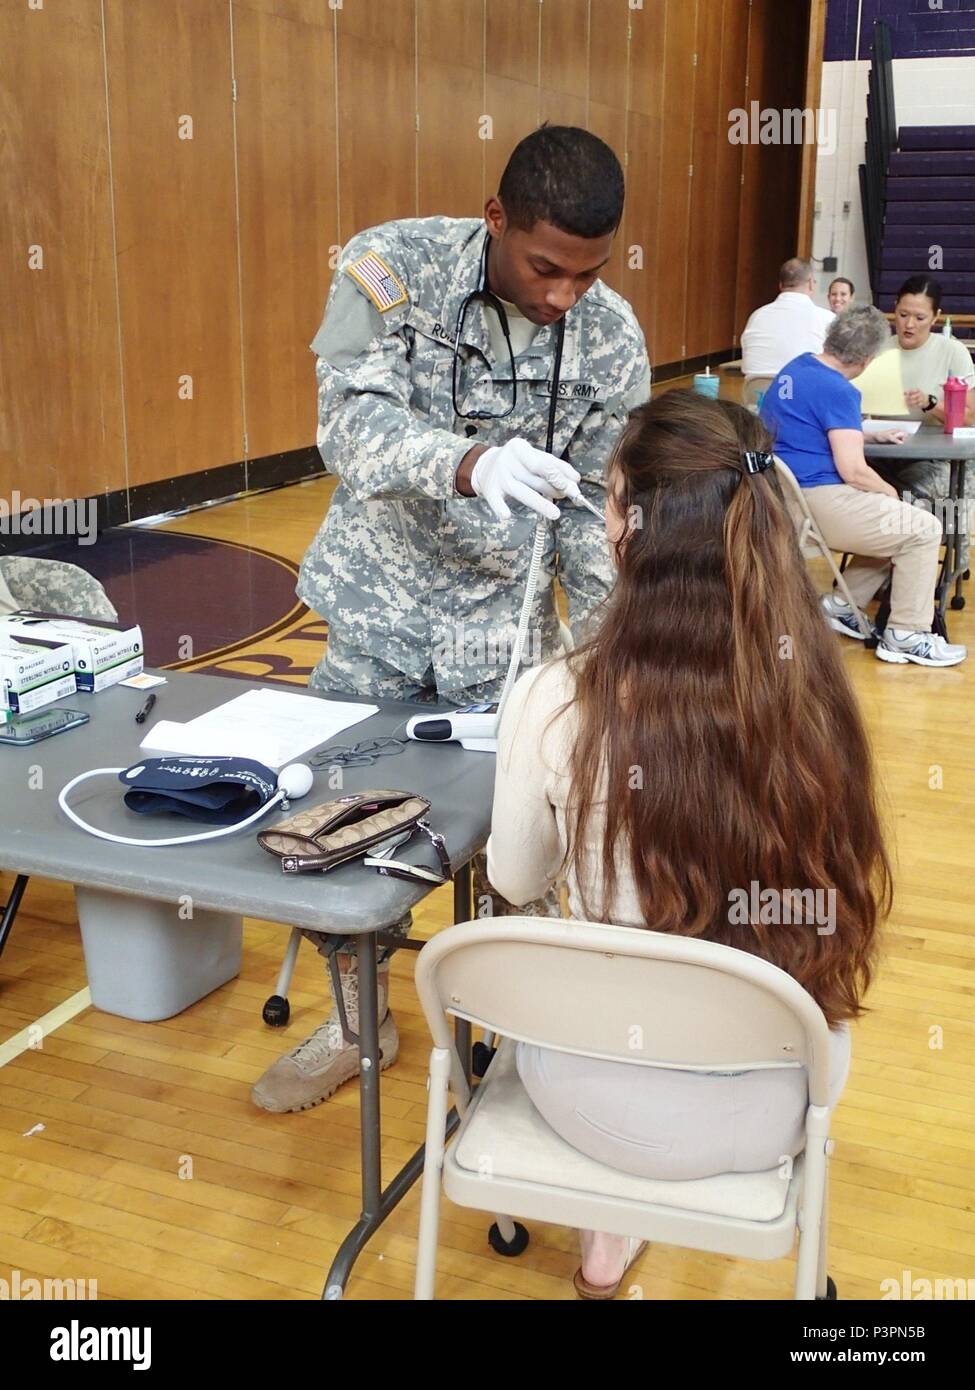 Spc. Xavier Ruiz, a licensed practical nurse from Company A, 48th Combat Support Hospital, Fort Story, Va., takes vital signs from a community member during the Greater Chenango Cares Innovative Readiness Training event, July 19, 2016.  Greater Chenango Cares is one of the Innovative Readiness Training events which provides real-world training in a joint civil-military environment while delivering world class medical care to the people of Chenango County, N.Y., from July 15-24. Stock Photo